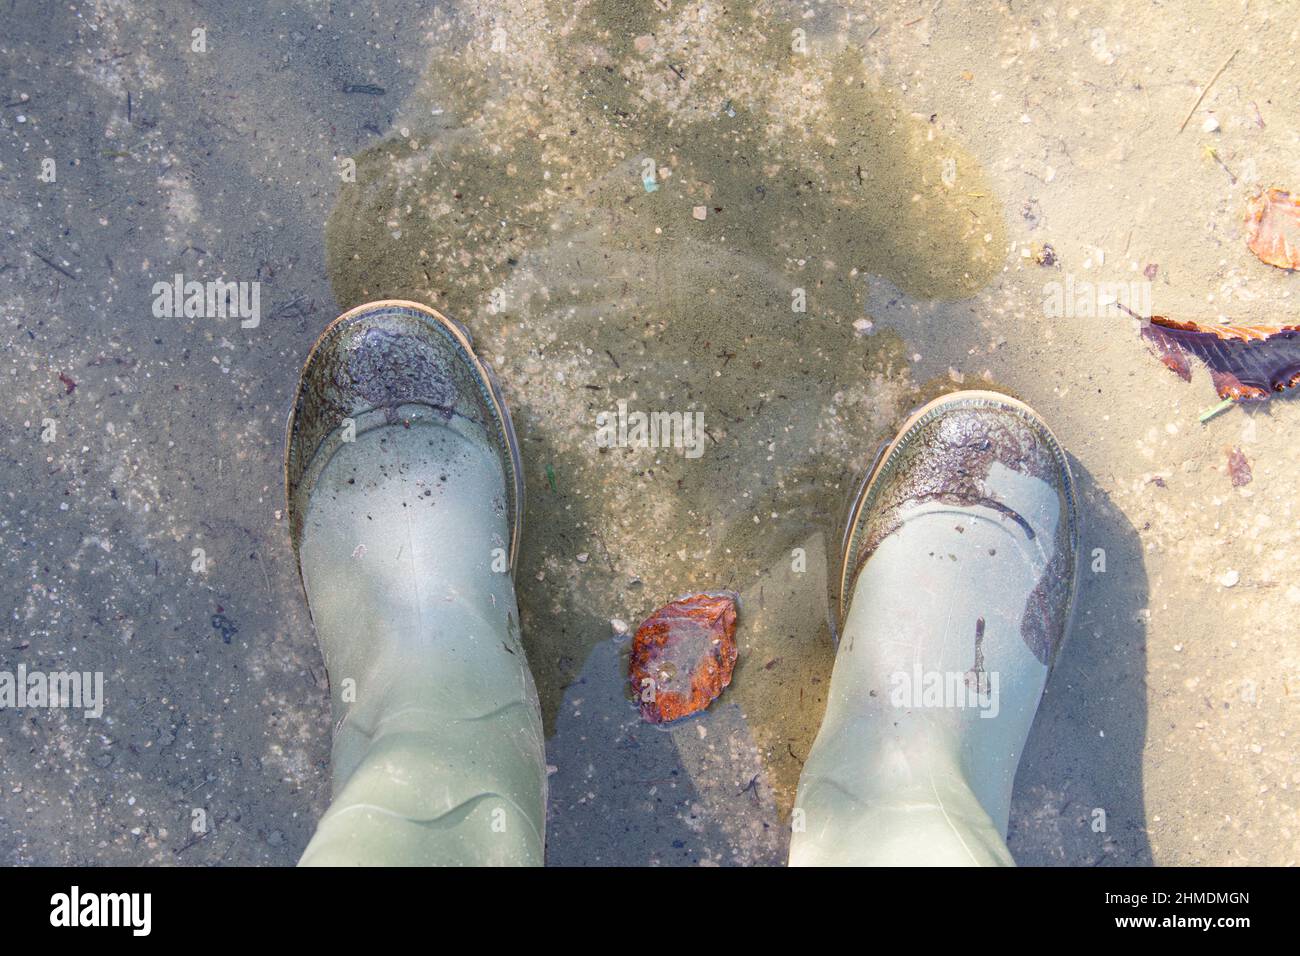 Muddy green rubber boots in a puddle Stock Photo